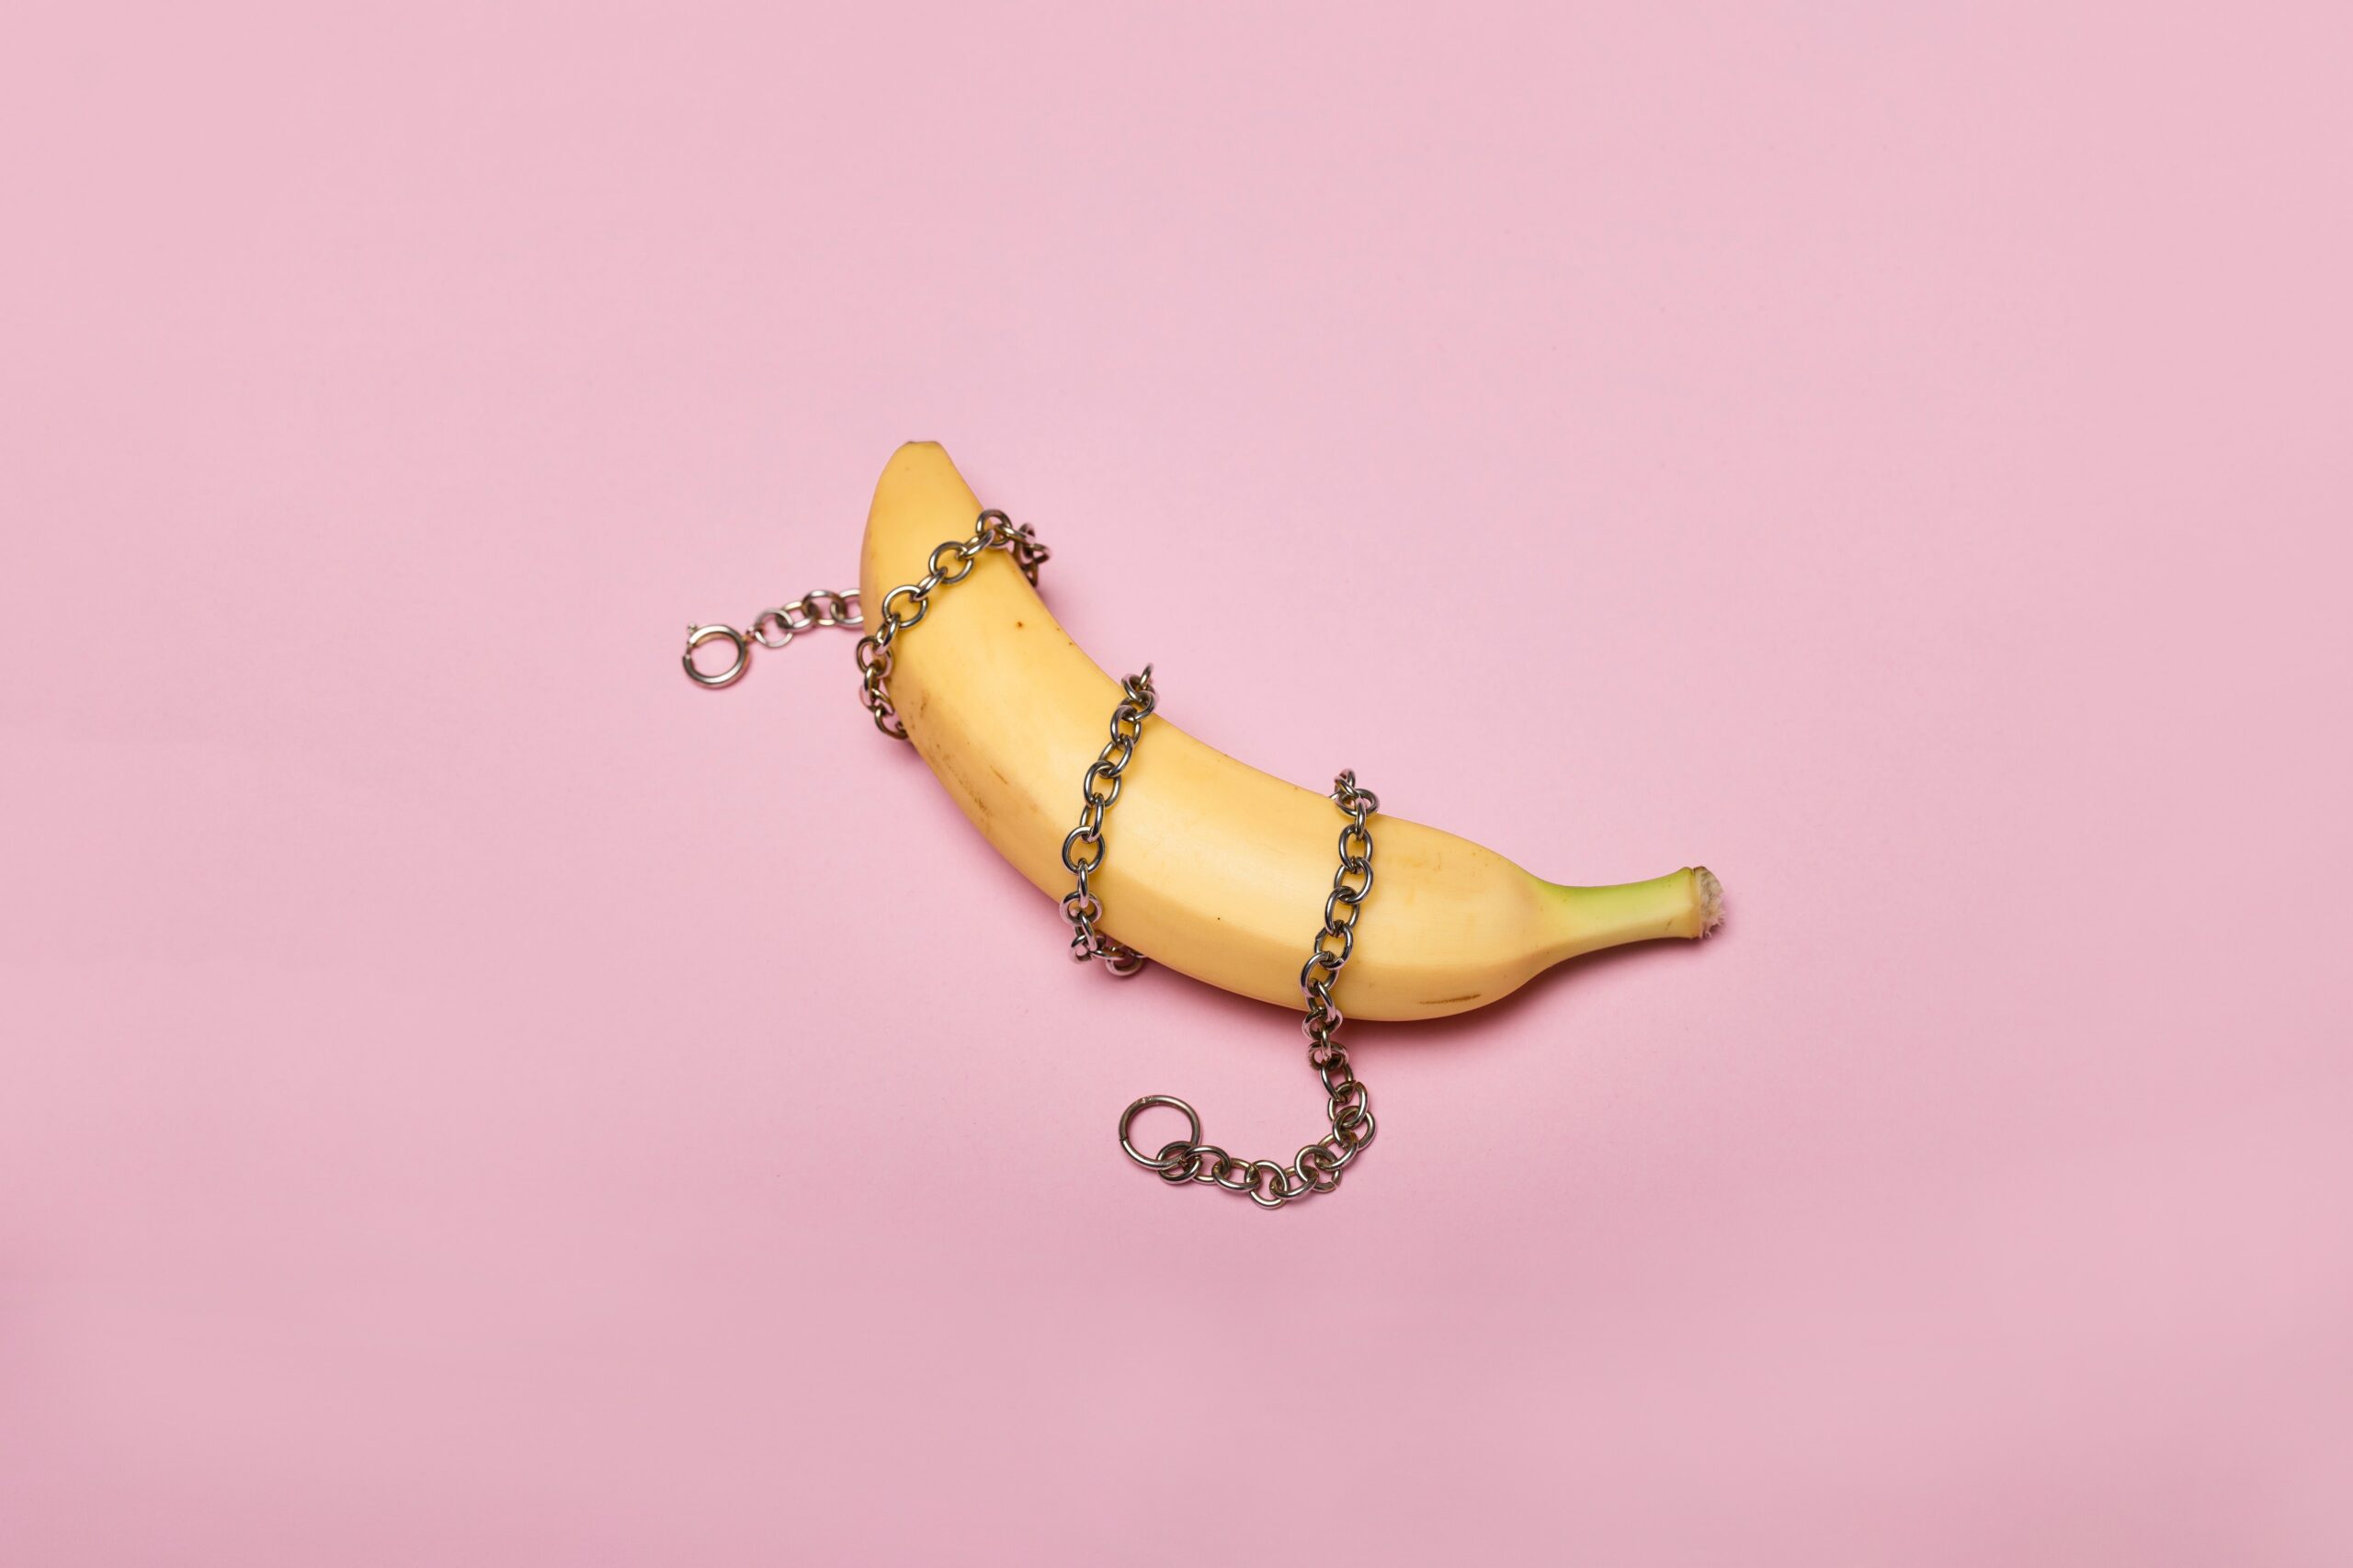 Photograph showing a yellow banana on a pink background. The banana has a silver chain wrapped around it three times. Photo courtesy Deon Black.